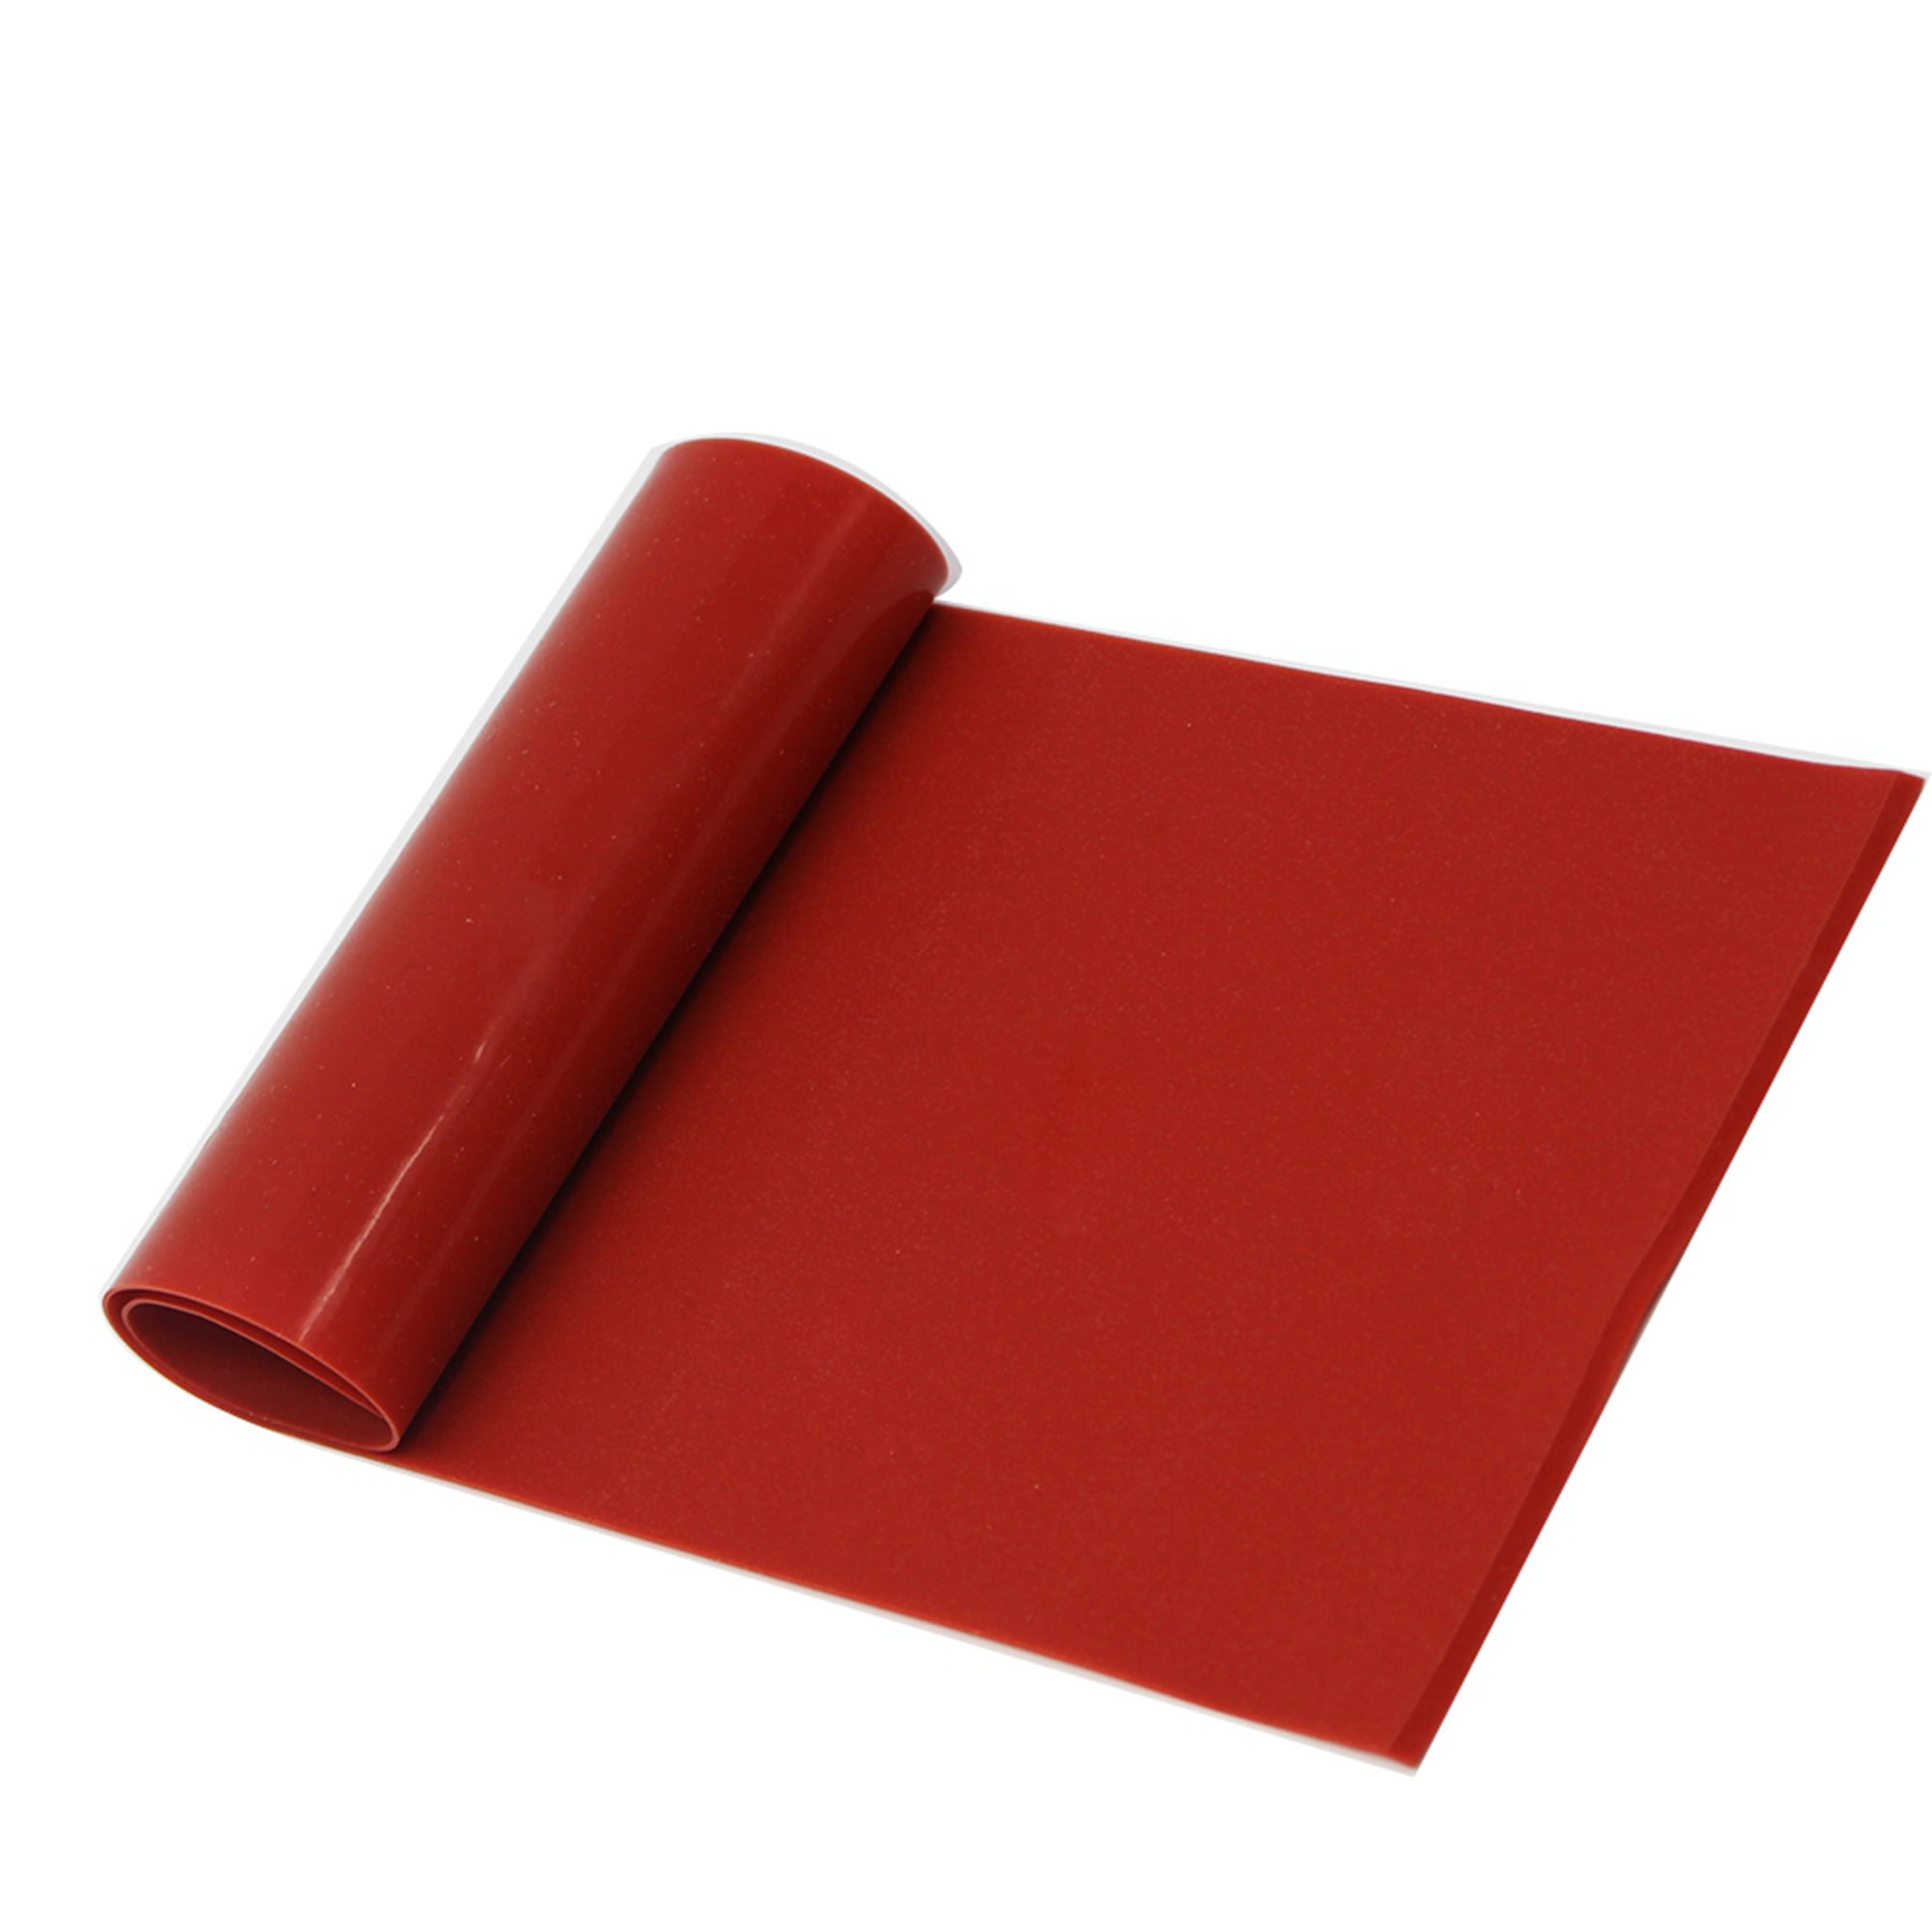 Silicone Rubber Sheet Thickness 0.5 1 2 3 4 5 mm Translucent VMQ Sheeting  Pad for Vacuum Press Oven Heat Resistant Silicone Mat - AliExpress